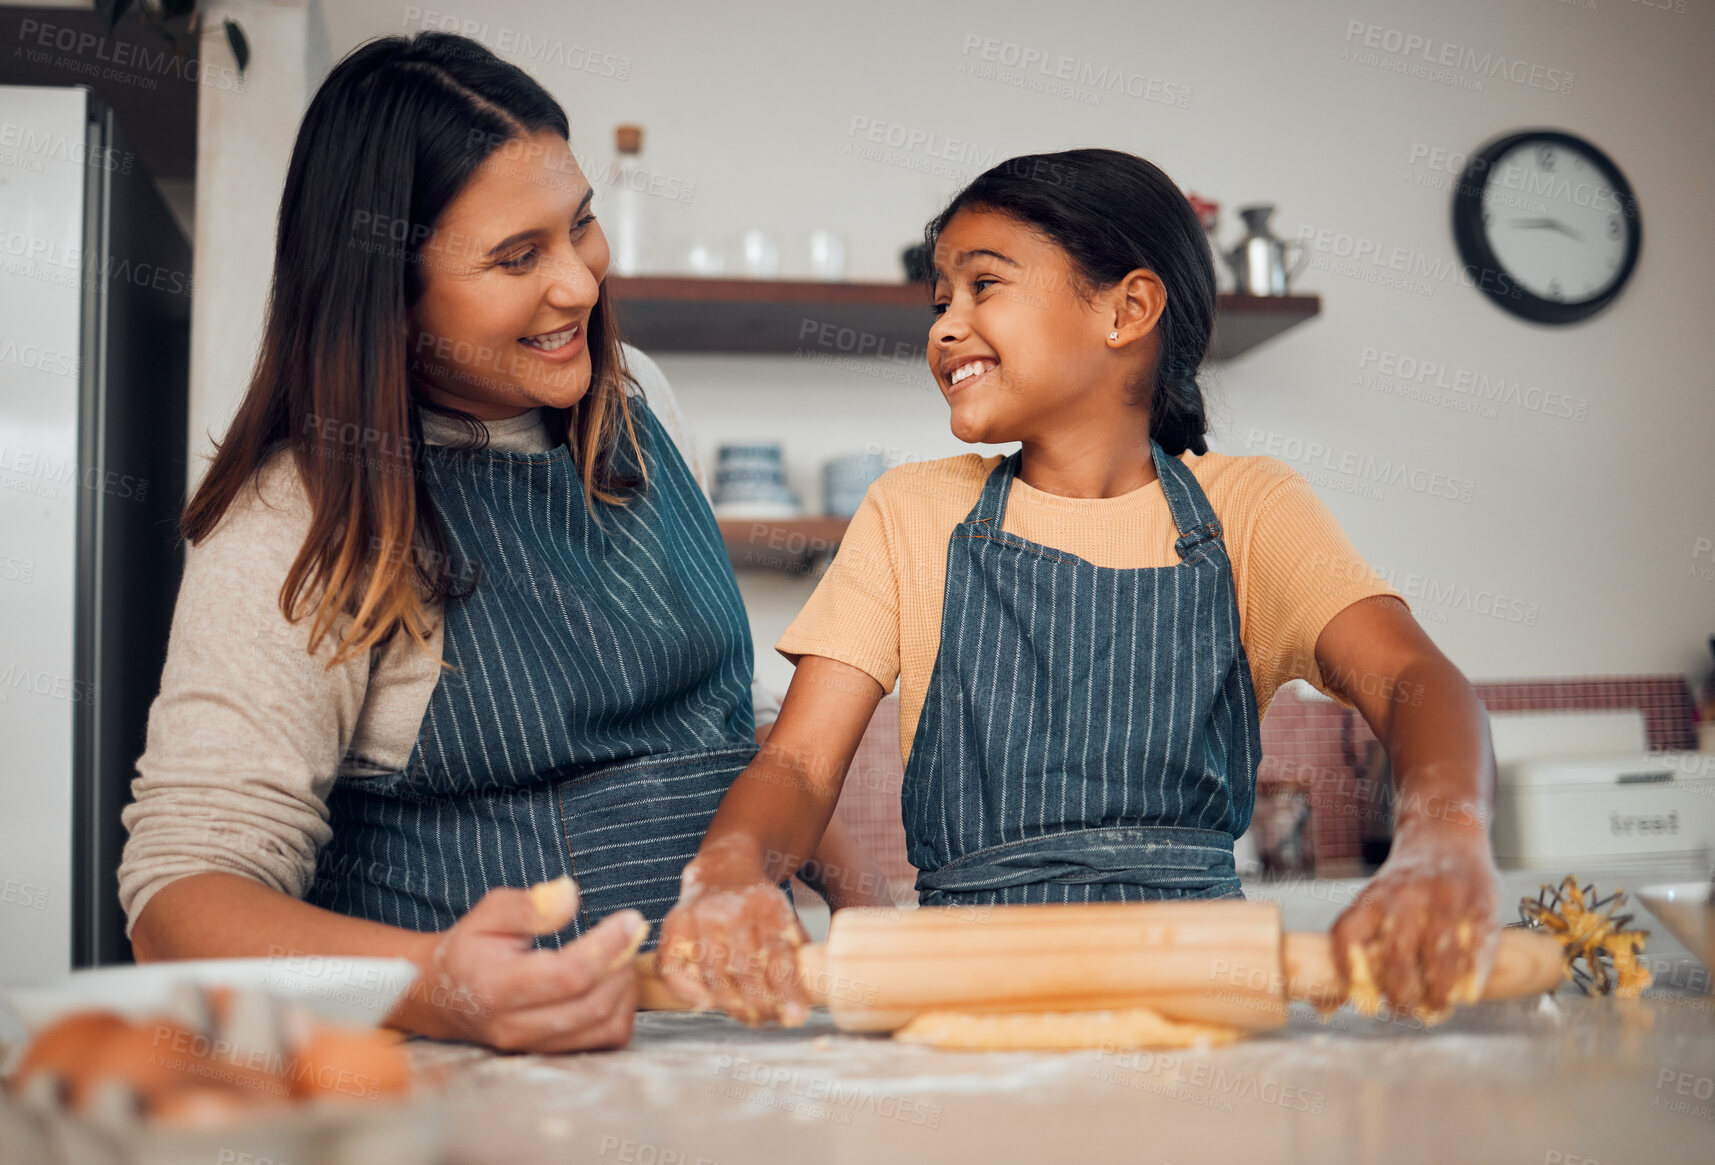 Buy stock photo Family, mother and girl learning baking in kitchen, bonding and having fun. Food, cooking education and mom teaching chef kid how to bake delicious pastry, smiling and enjoying quality time together.